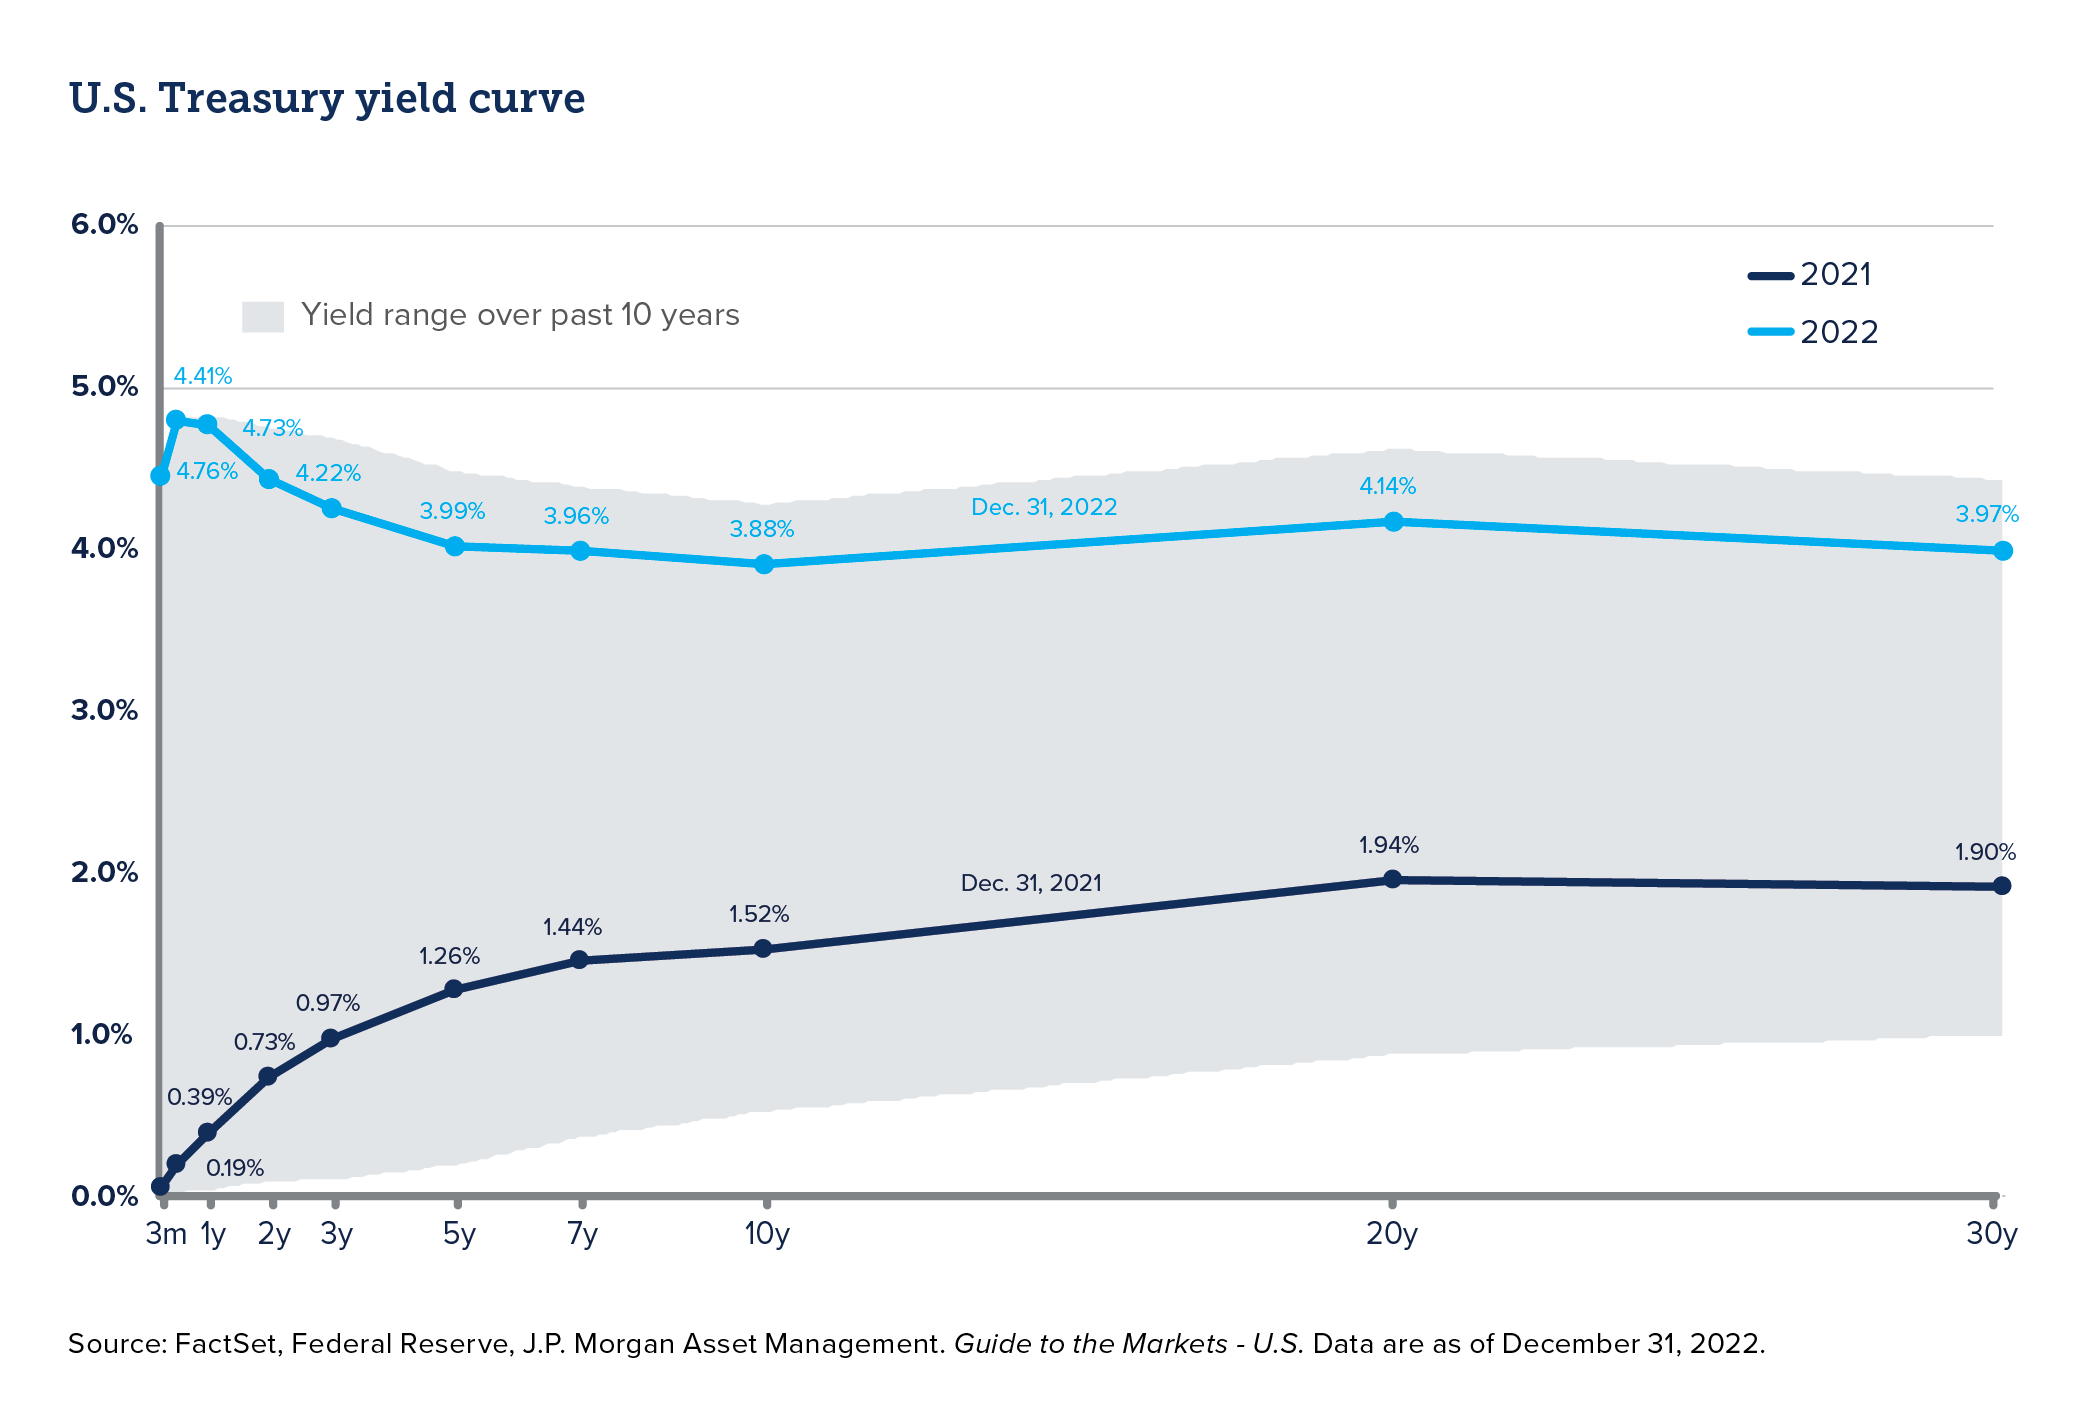 Chart showing U.S. Treasury yield curve over the past 10 years